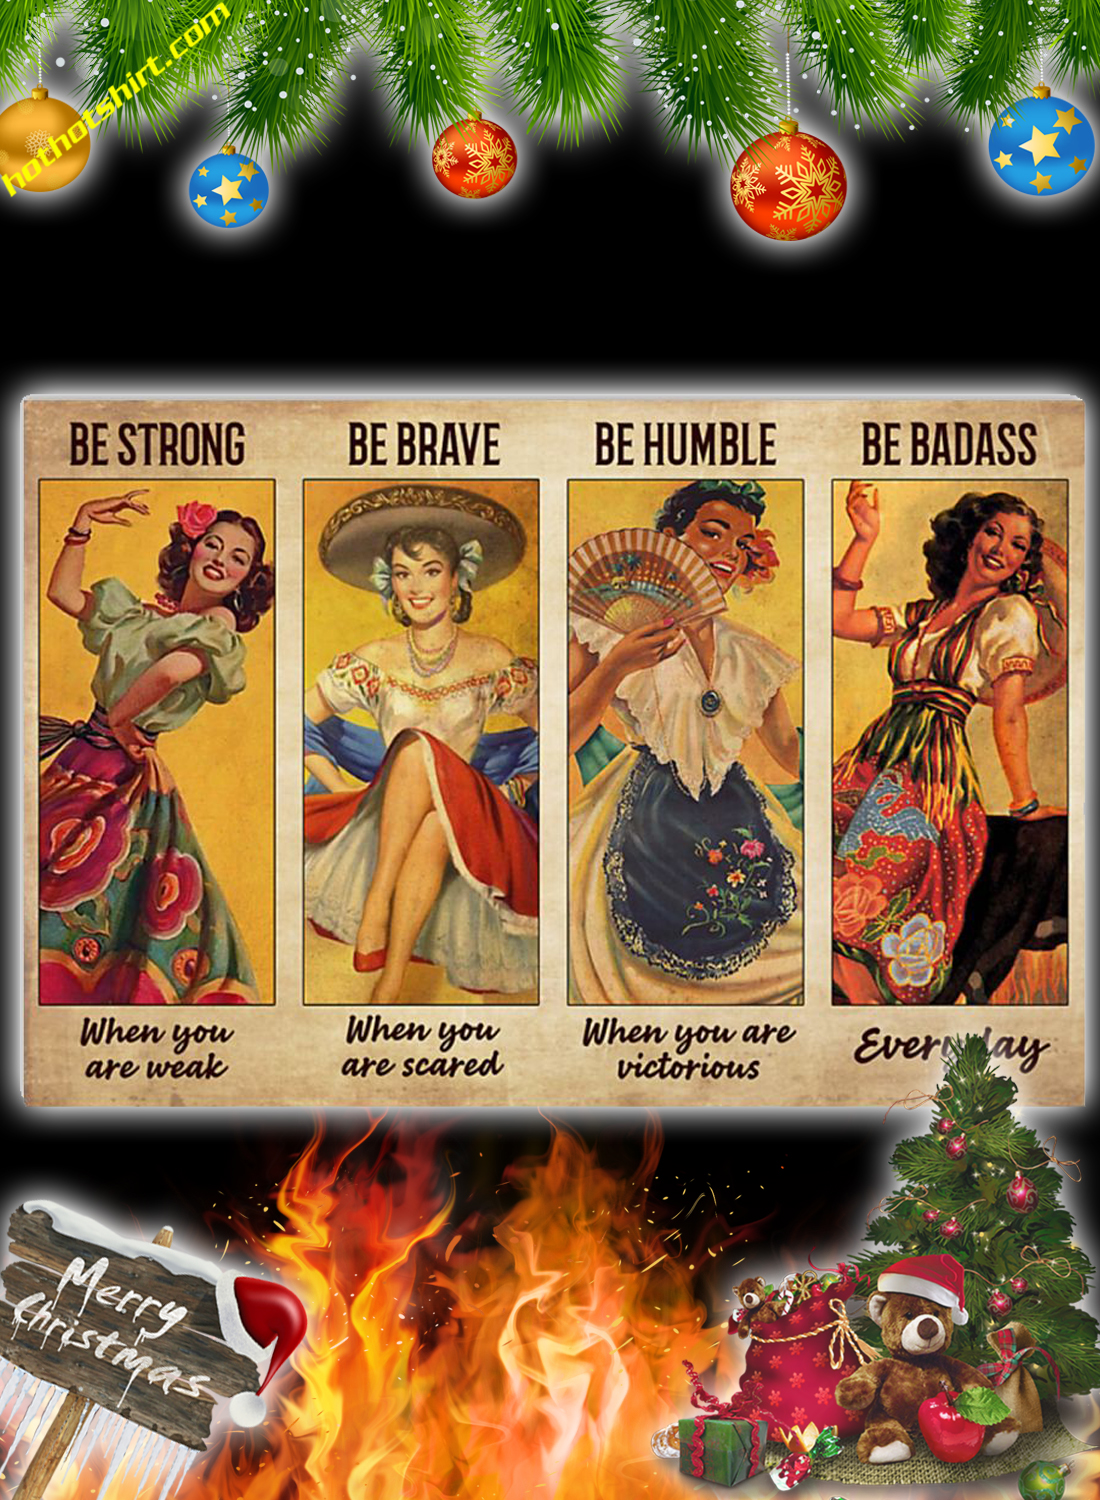 Woman Mexican Folk Dancing be strong be brave be humble be badass poster